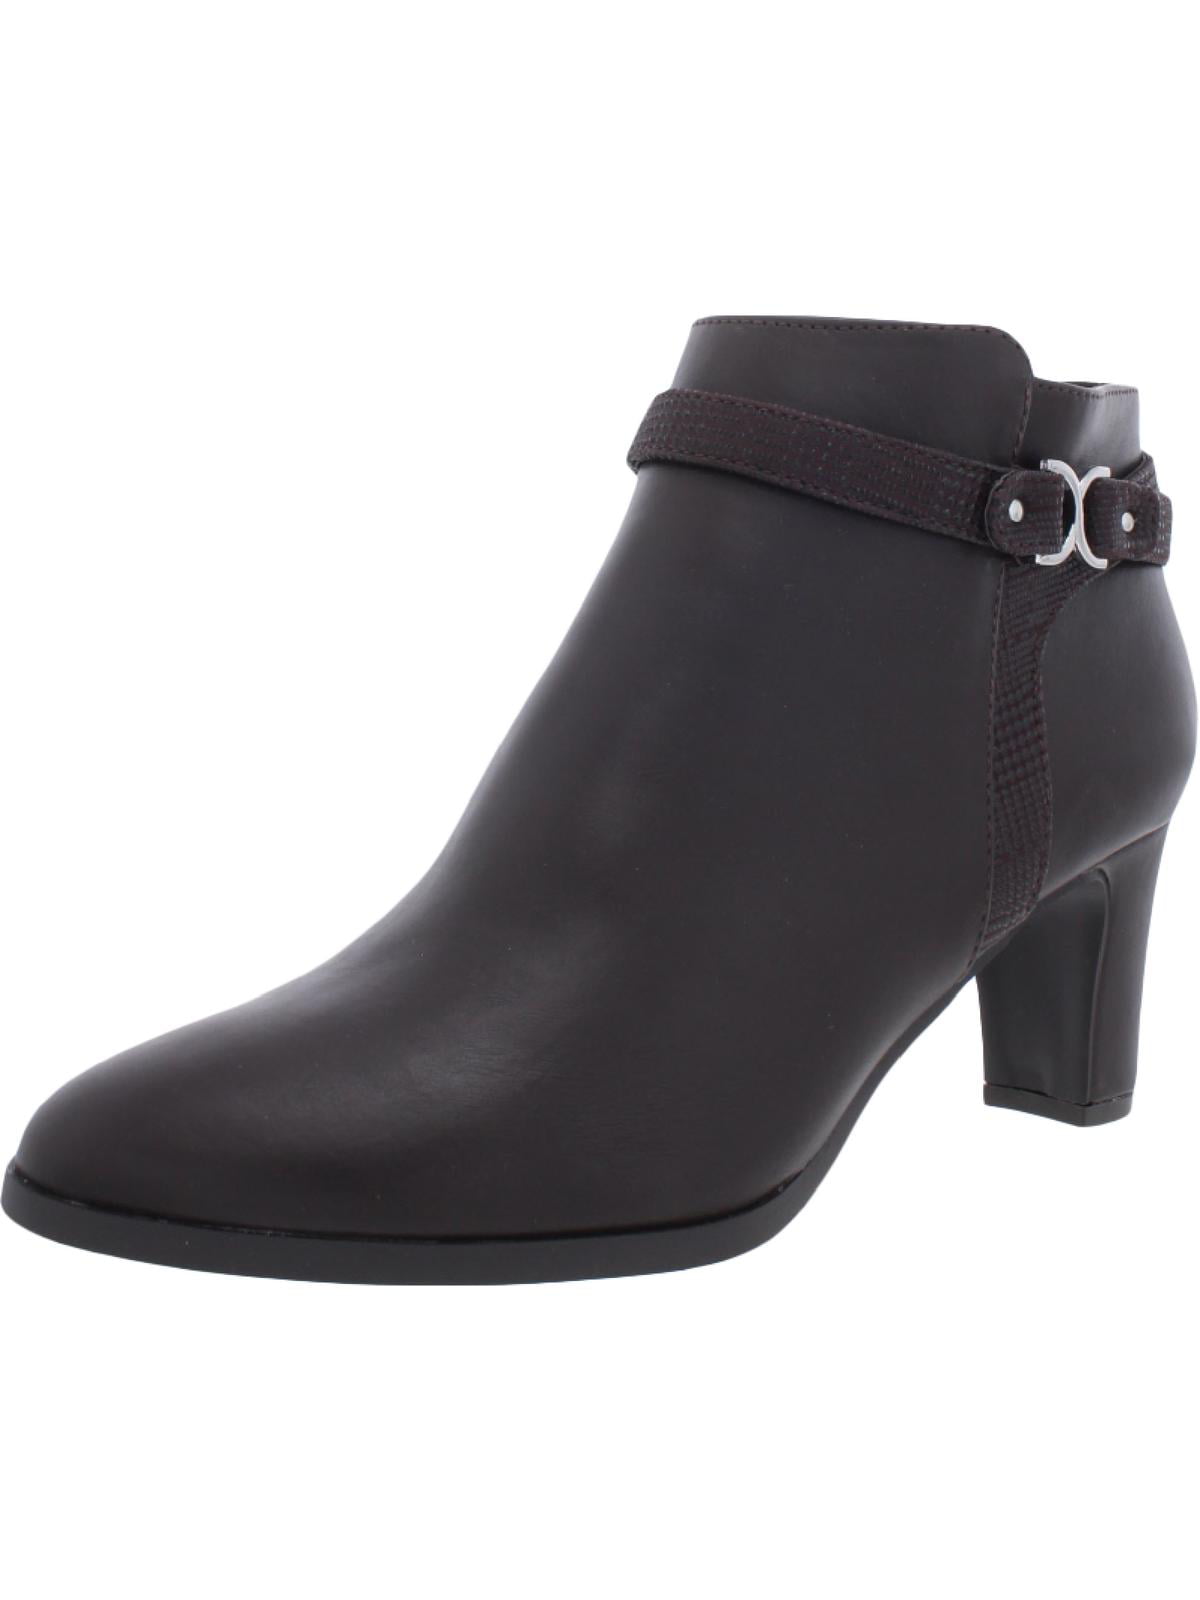 Charter Club Womens Pixxy Faux Leather Booties Dress Boots - Walmart.com